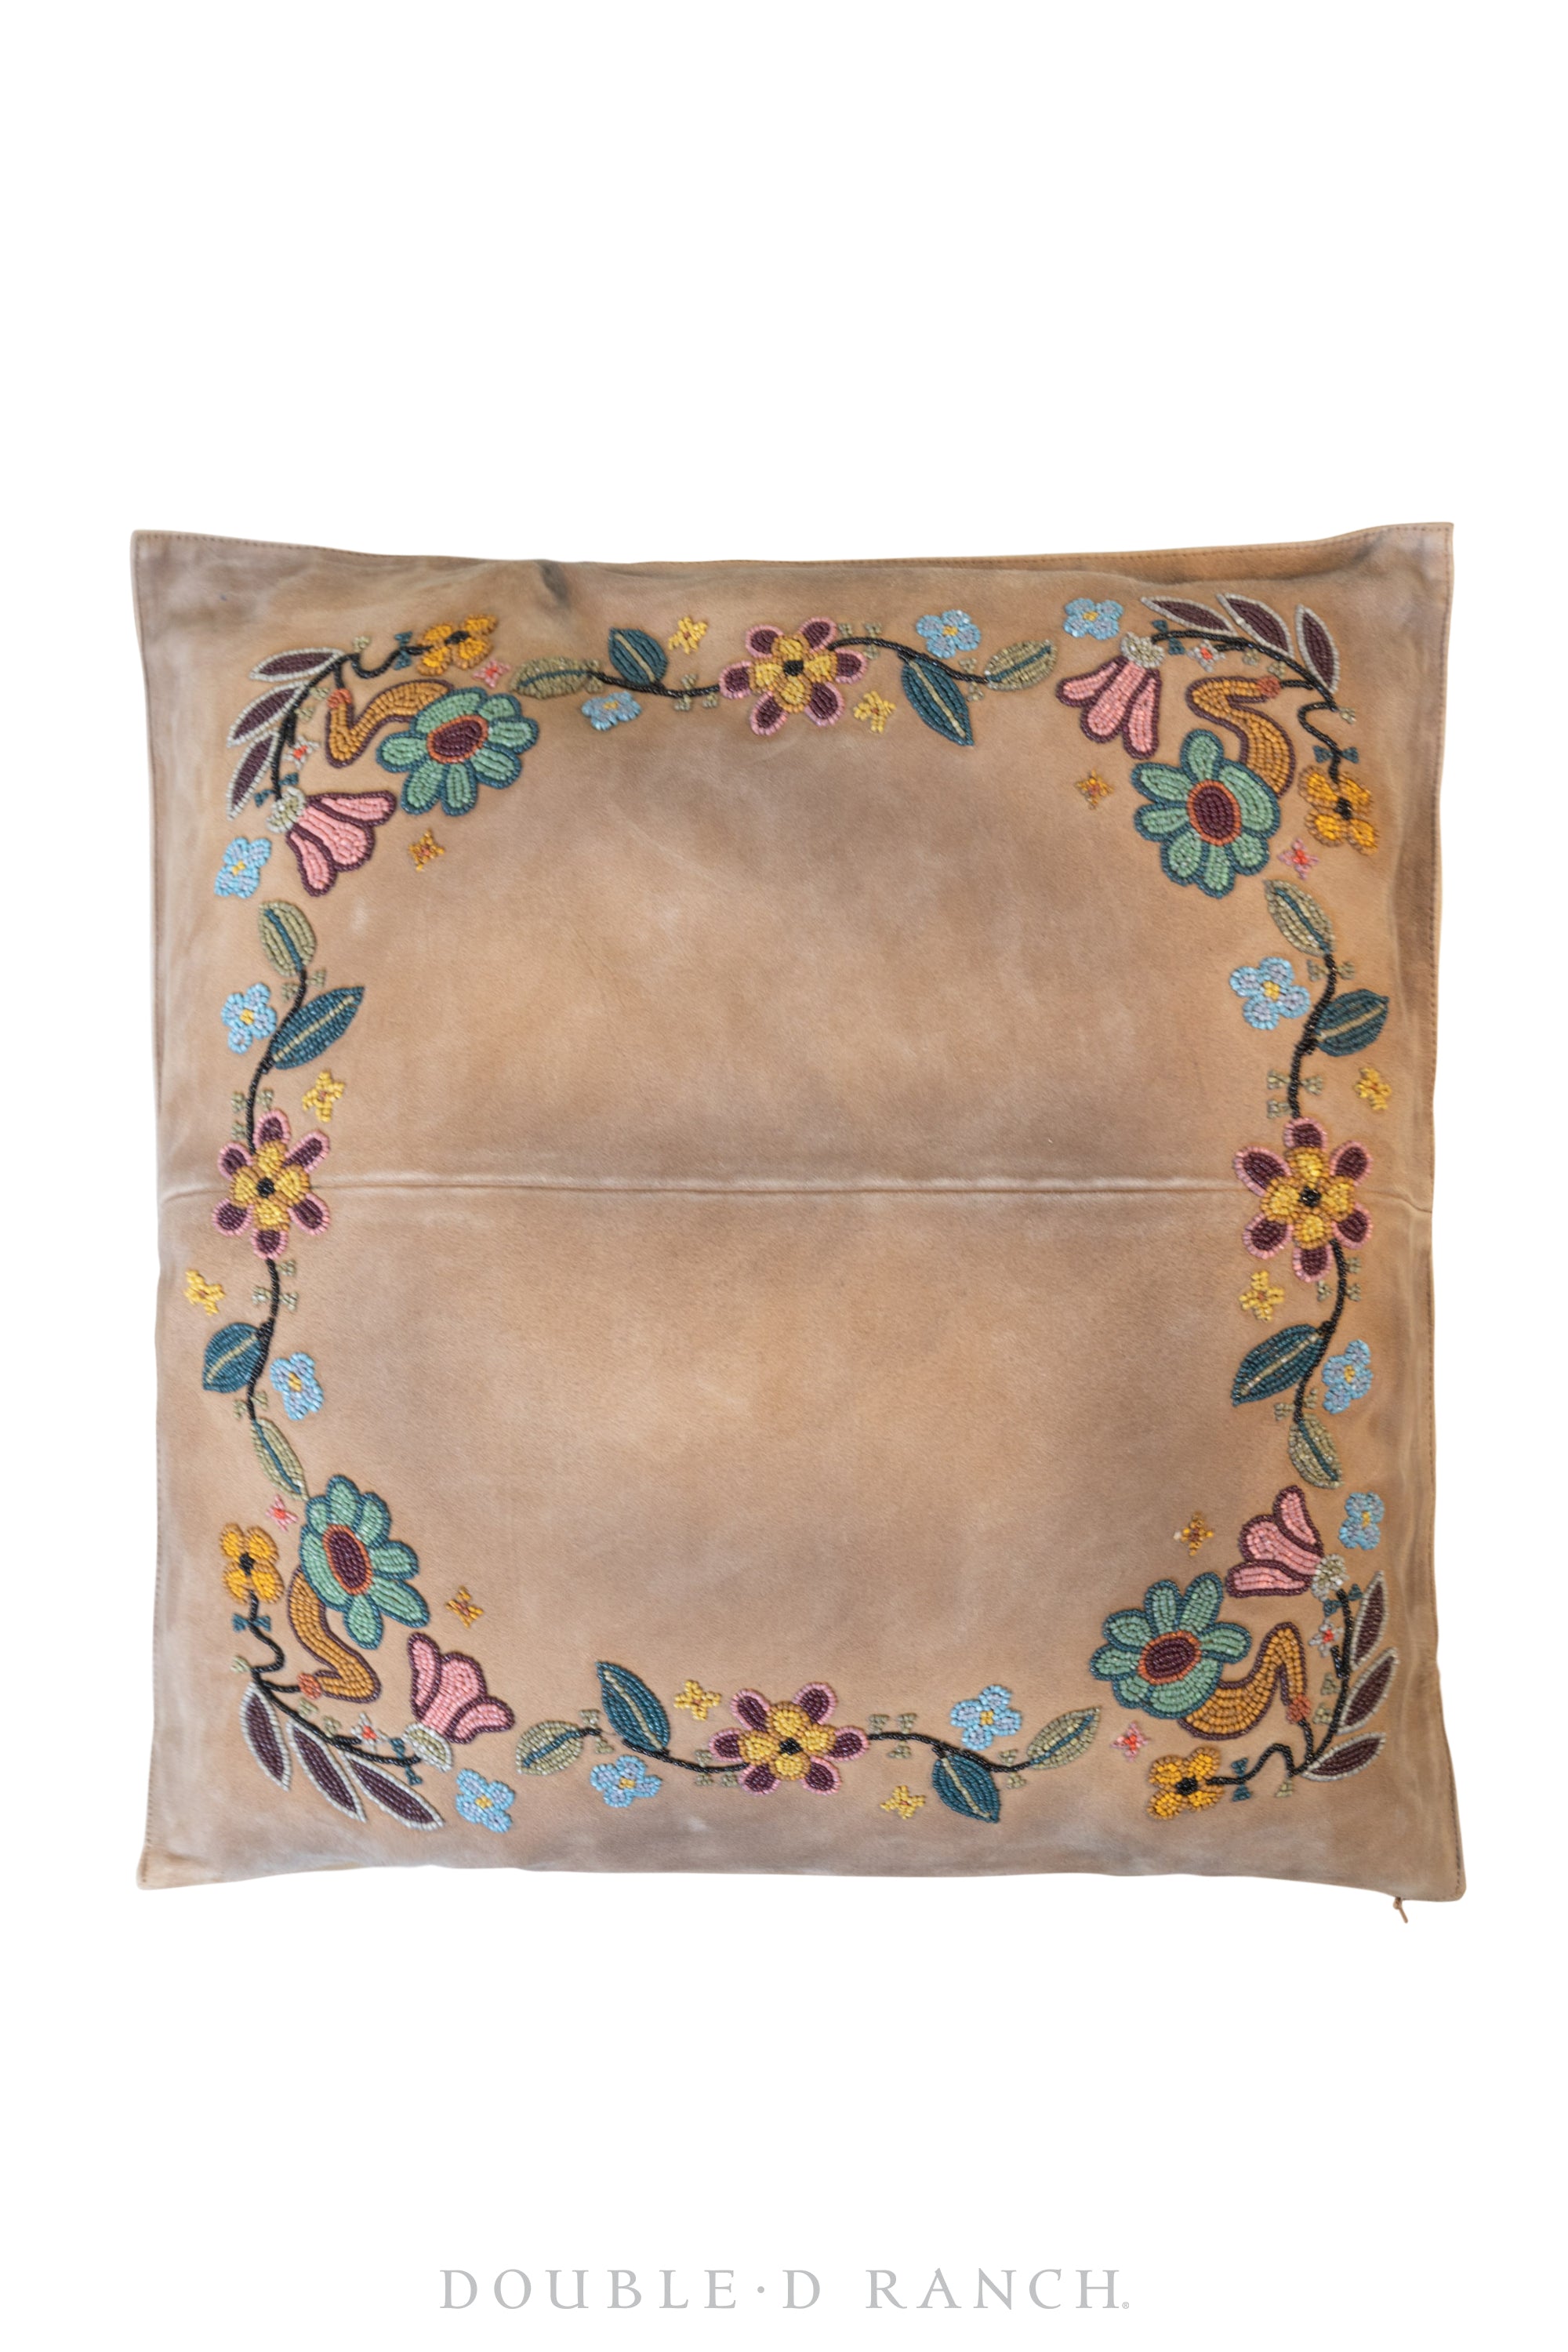 Pillow, Suede, Driskill's Floral, 759